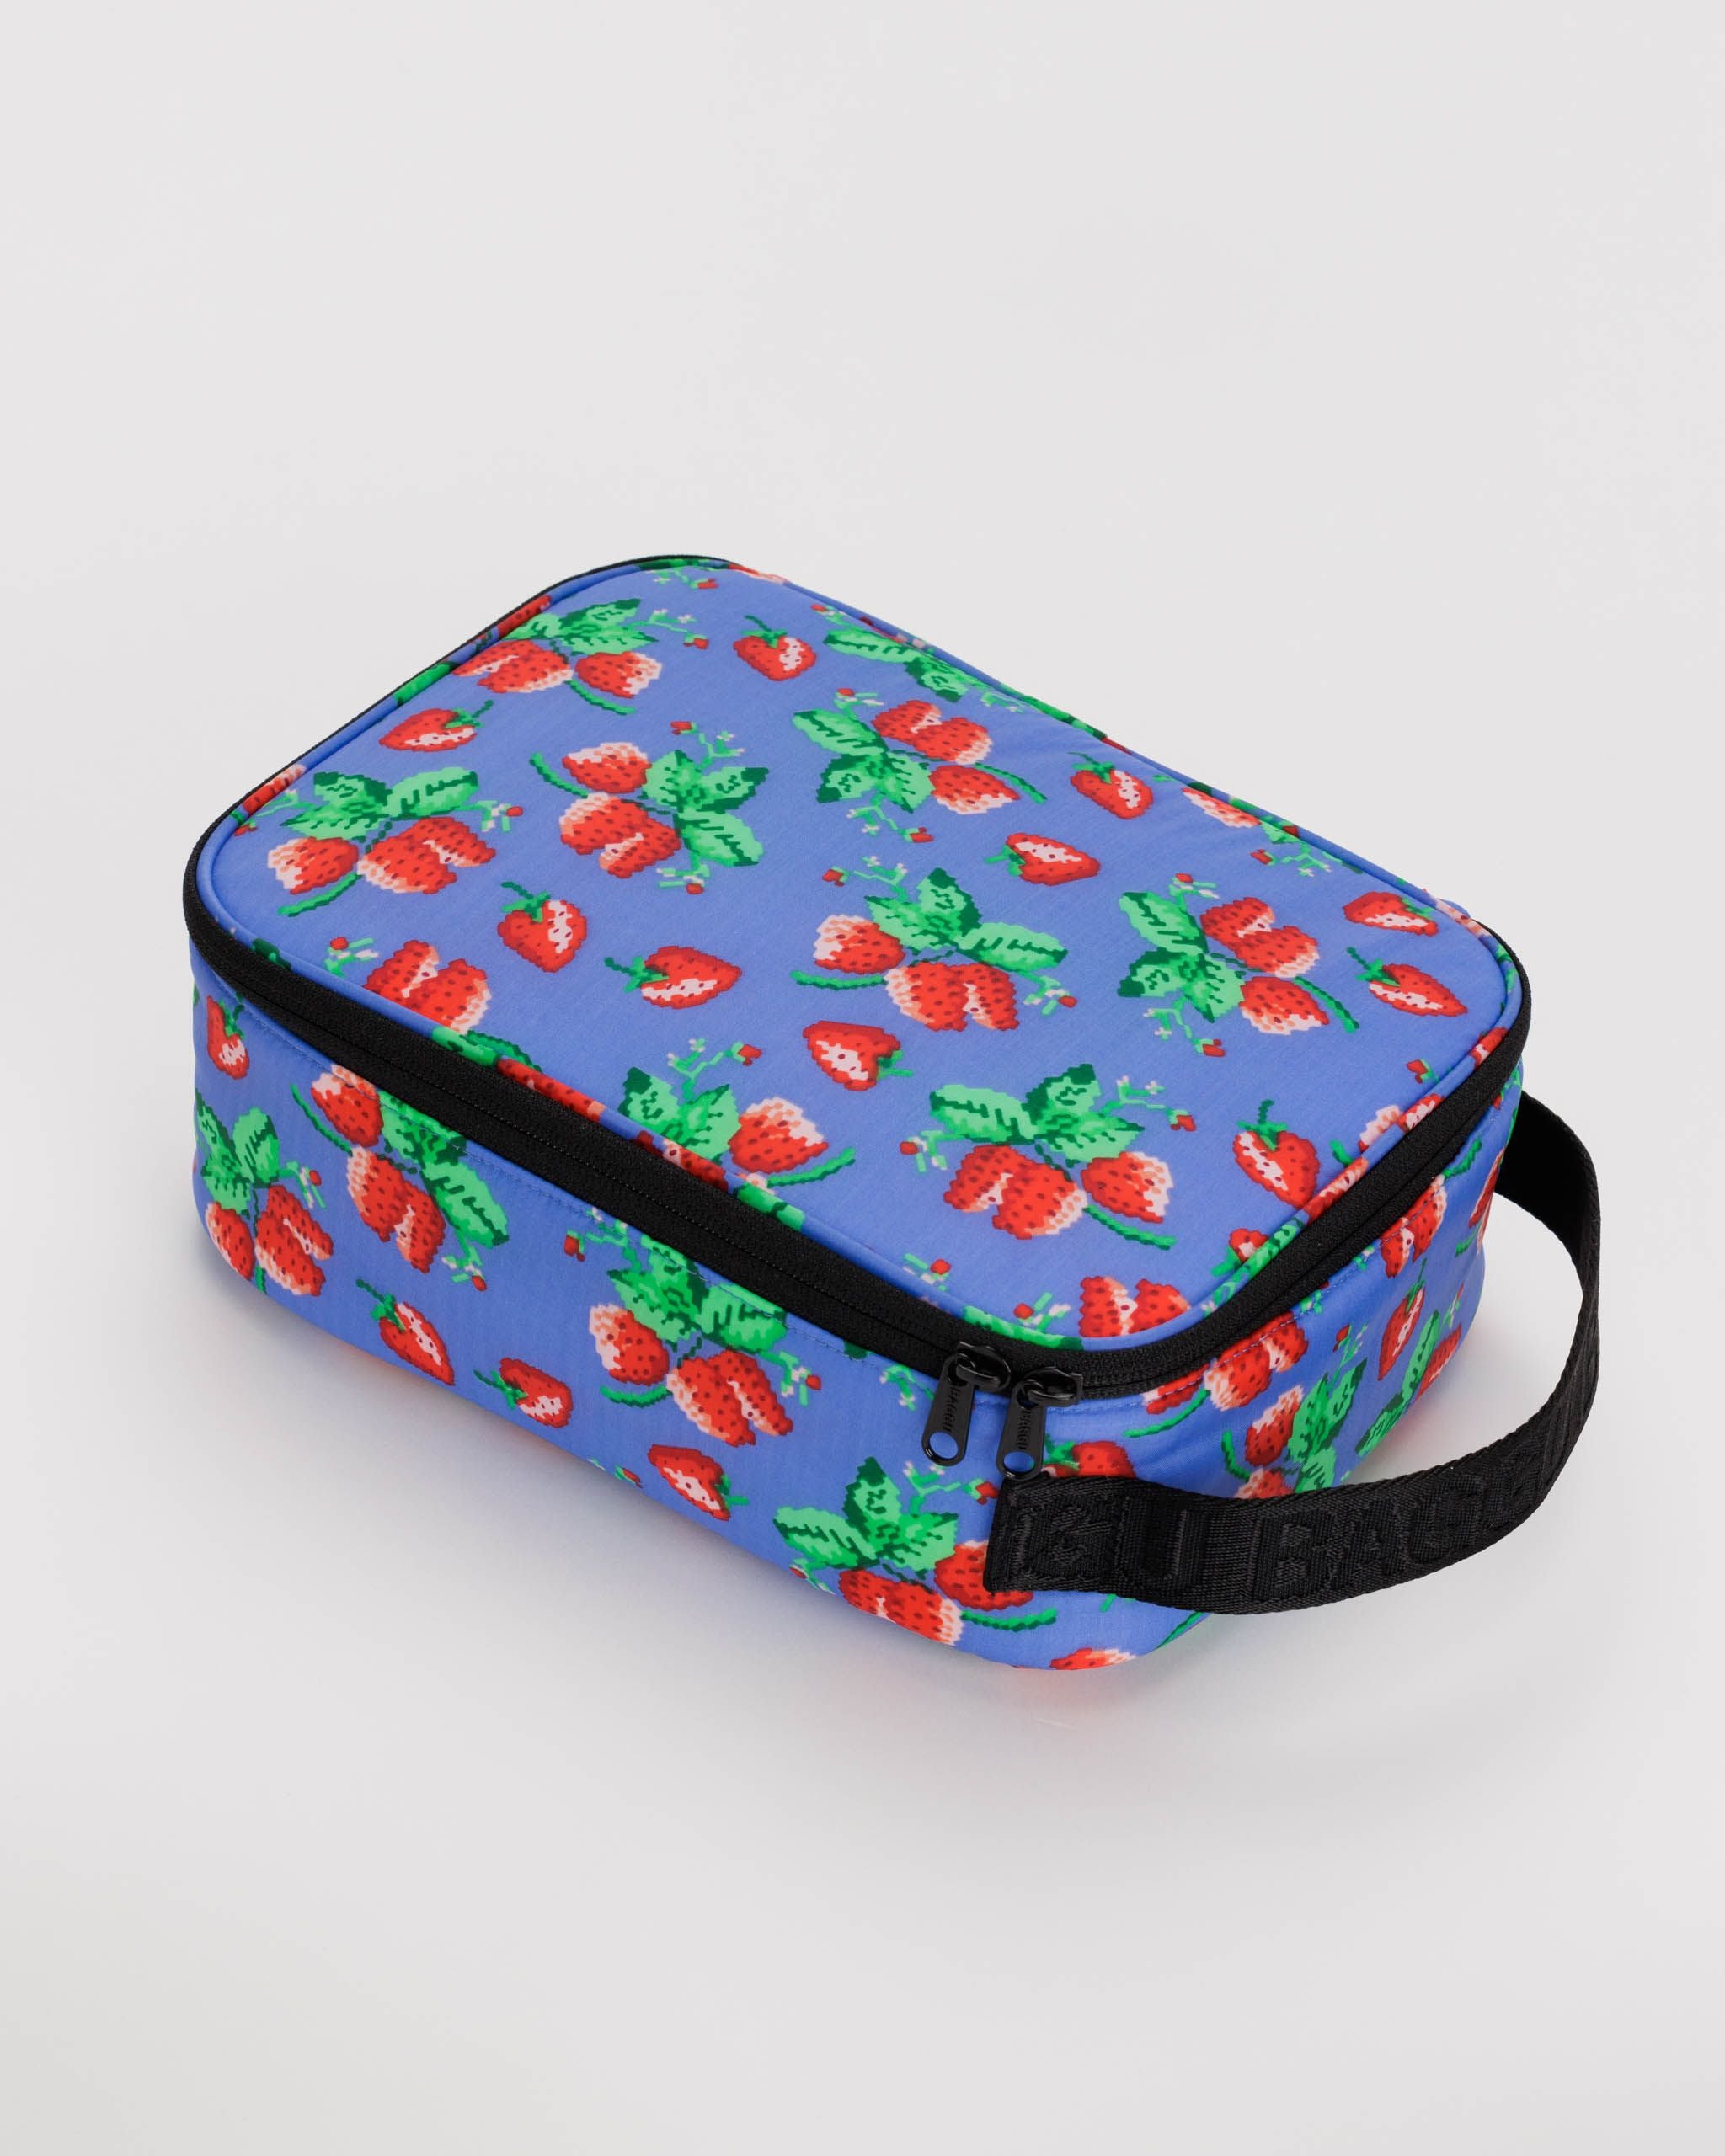 Daisy Print Lunch Bag, Portable Insulated Lunch Box Storage Bag For Outdoor